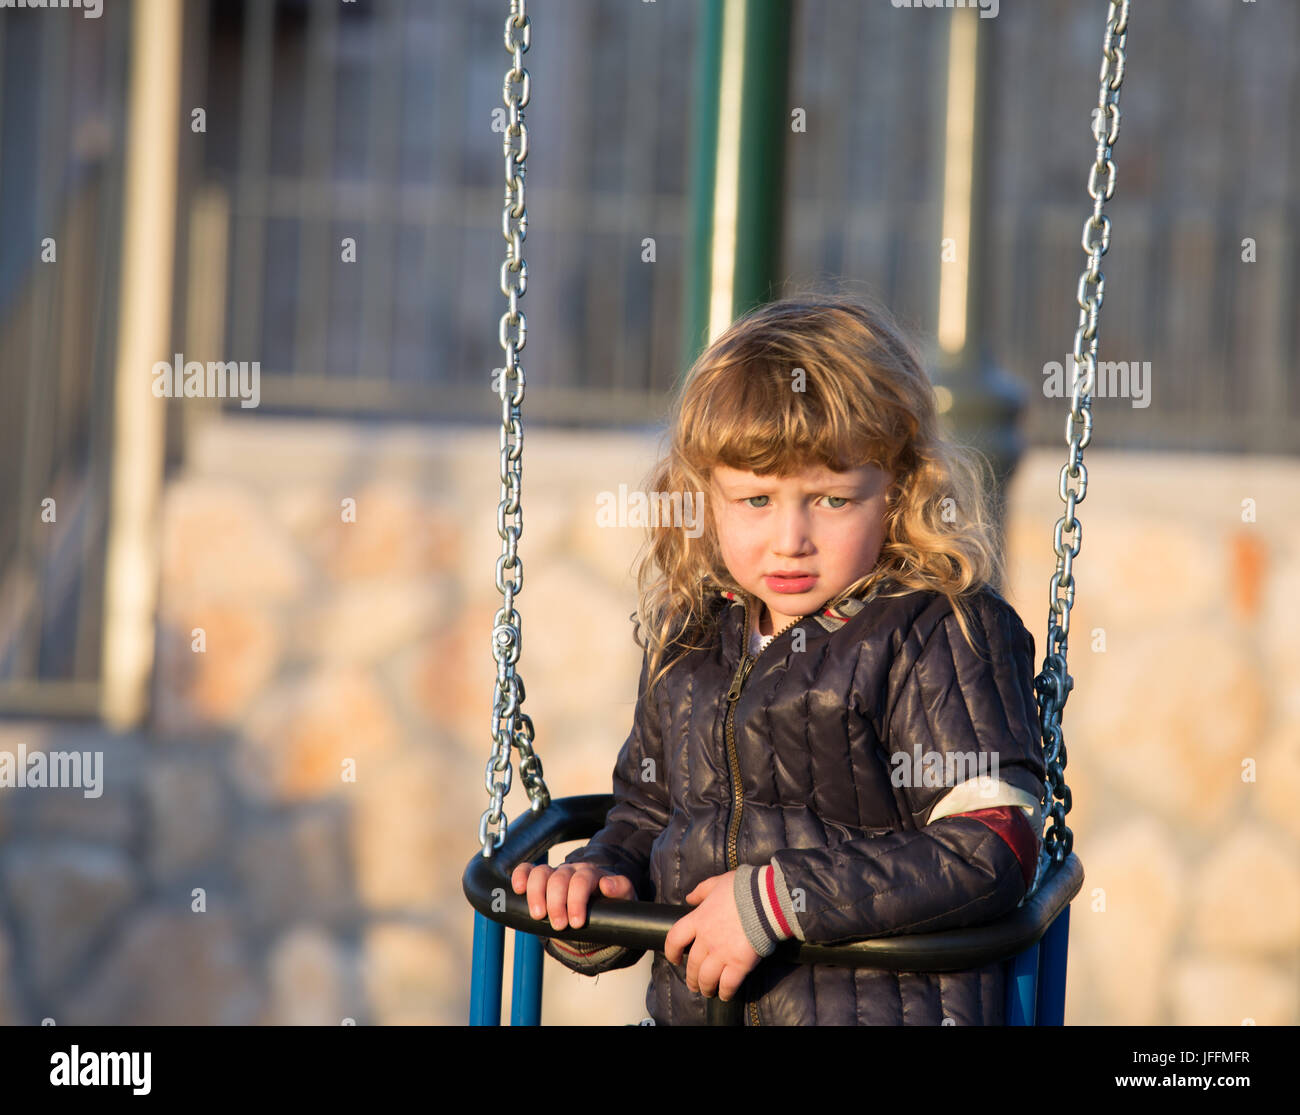 Adorable boy on a swing near the house Stock Photo